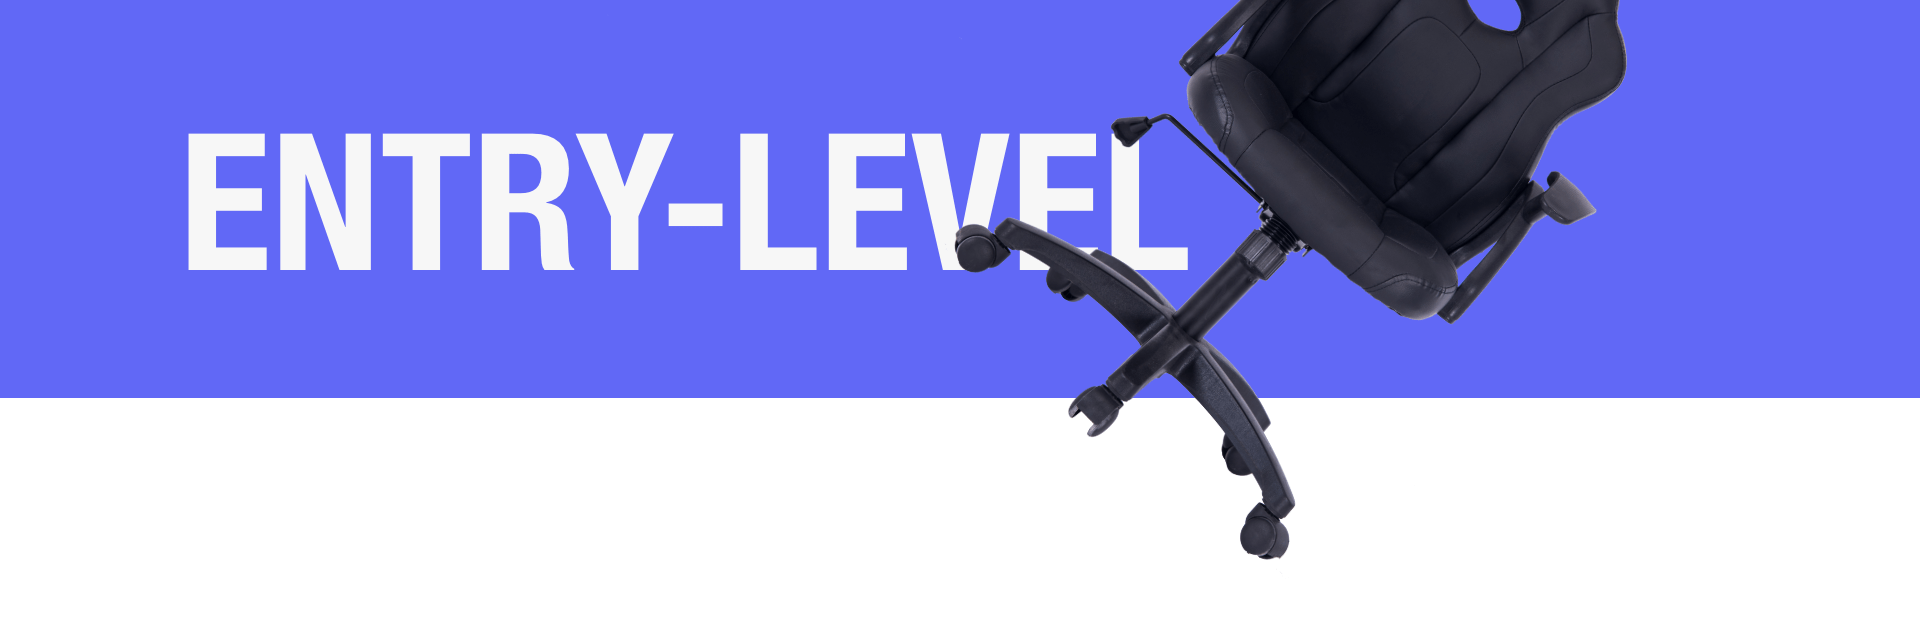 Entry-level Gaming Chairs